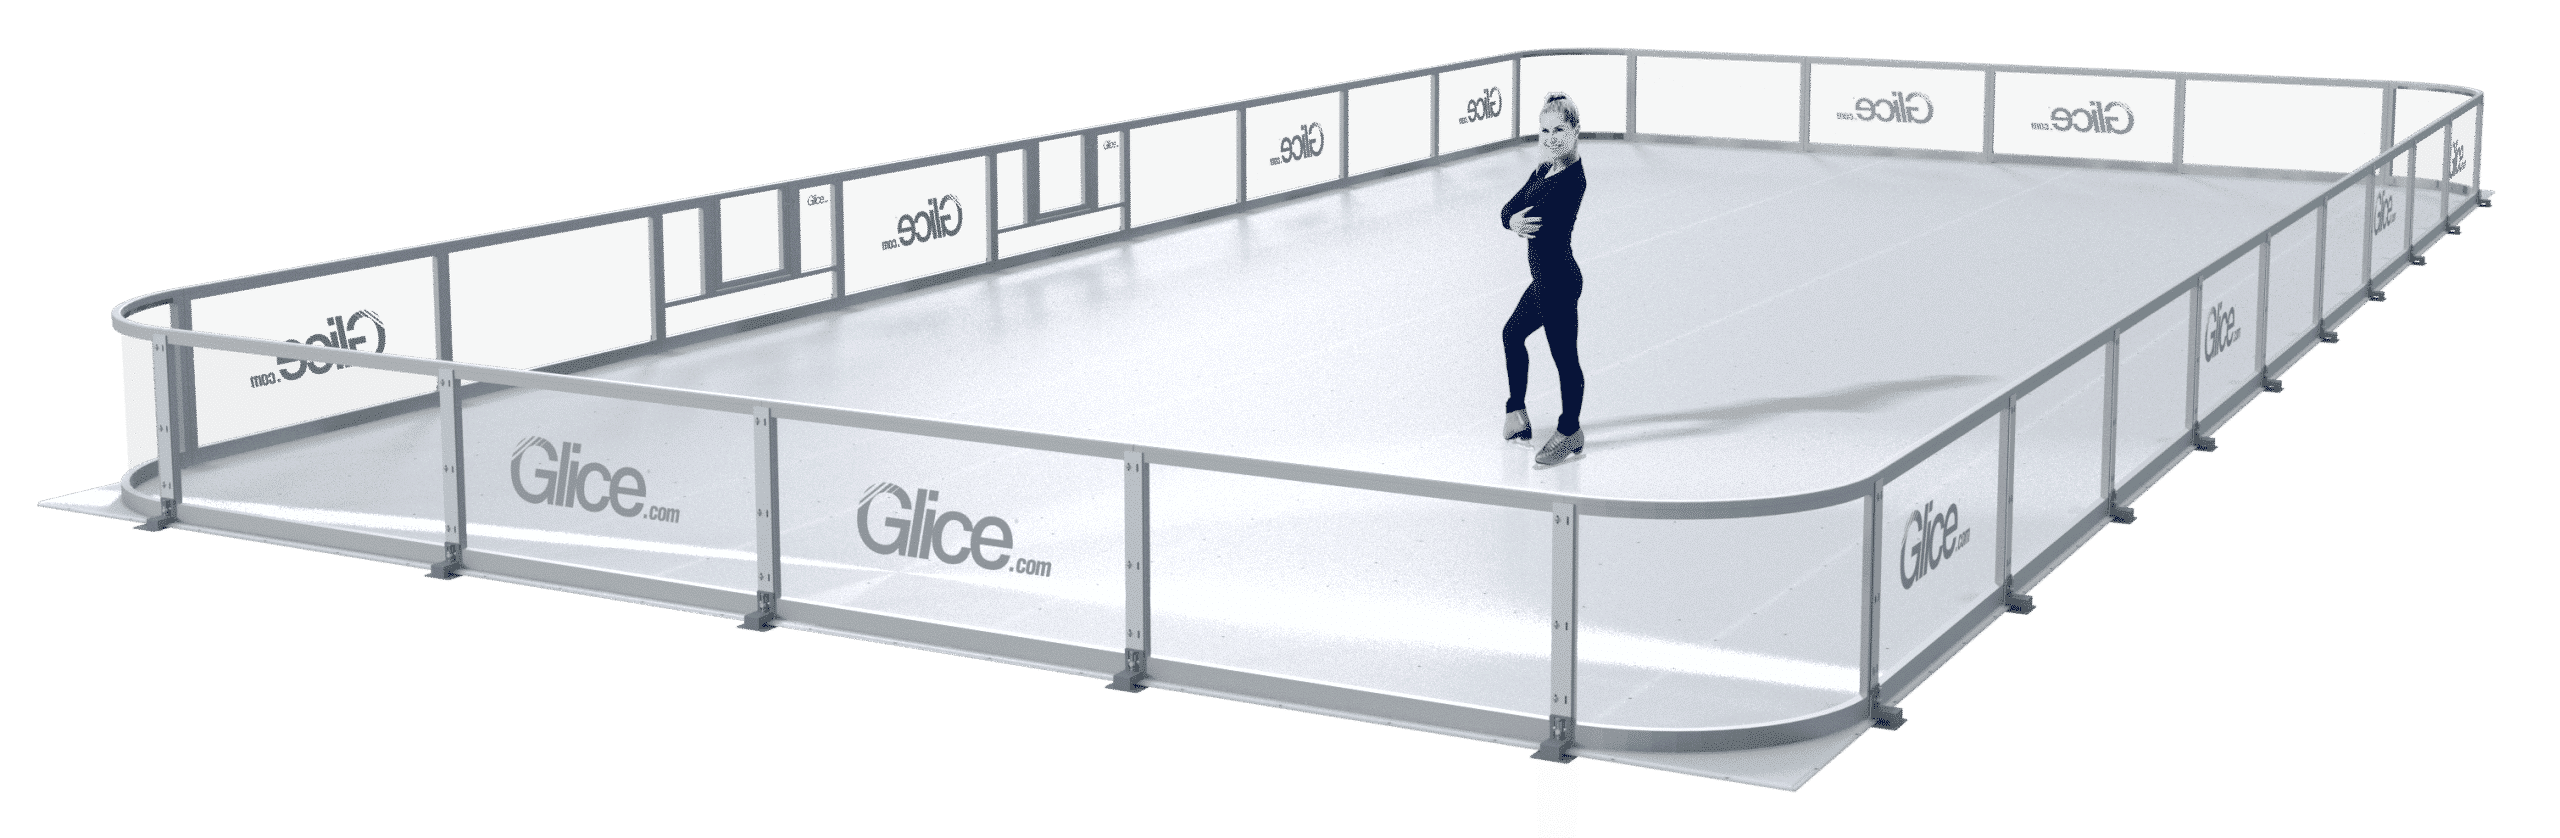 Glice synthetic ice rink with figure skater on it